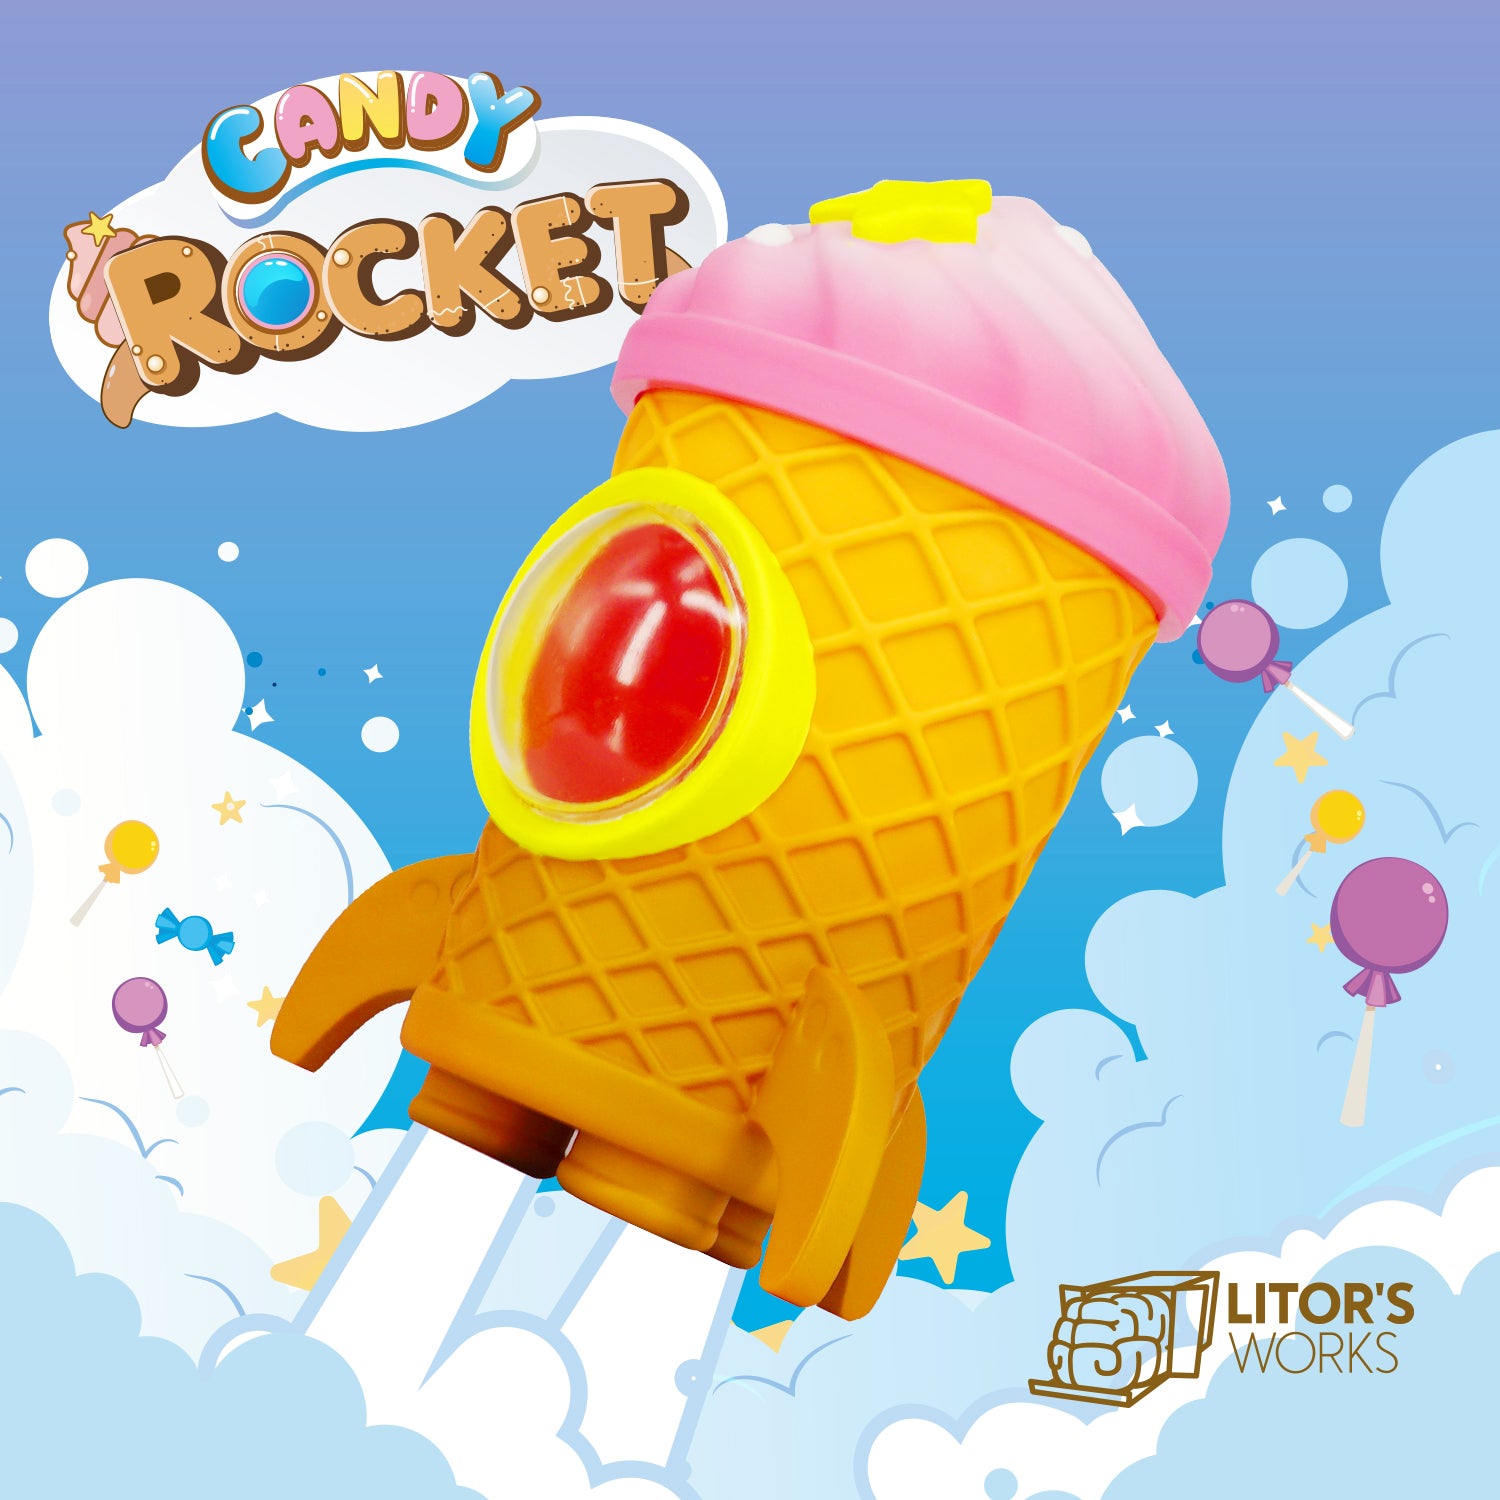 Candy Rocket by Litor's Works x Jelly Mew